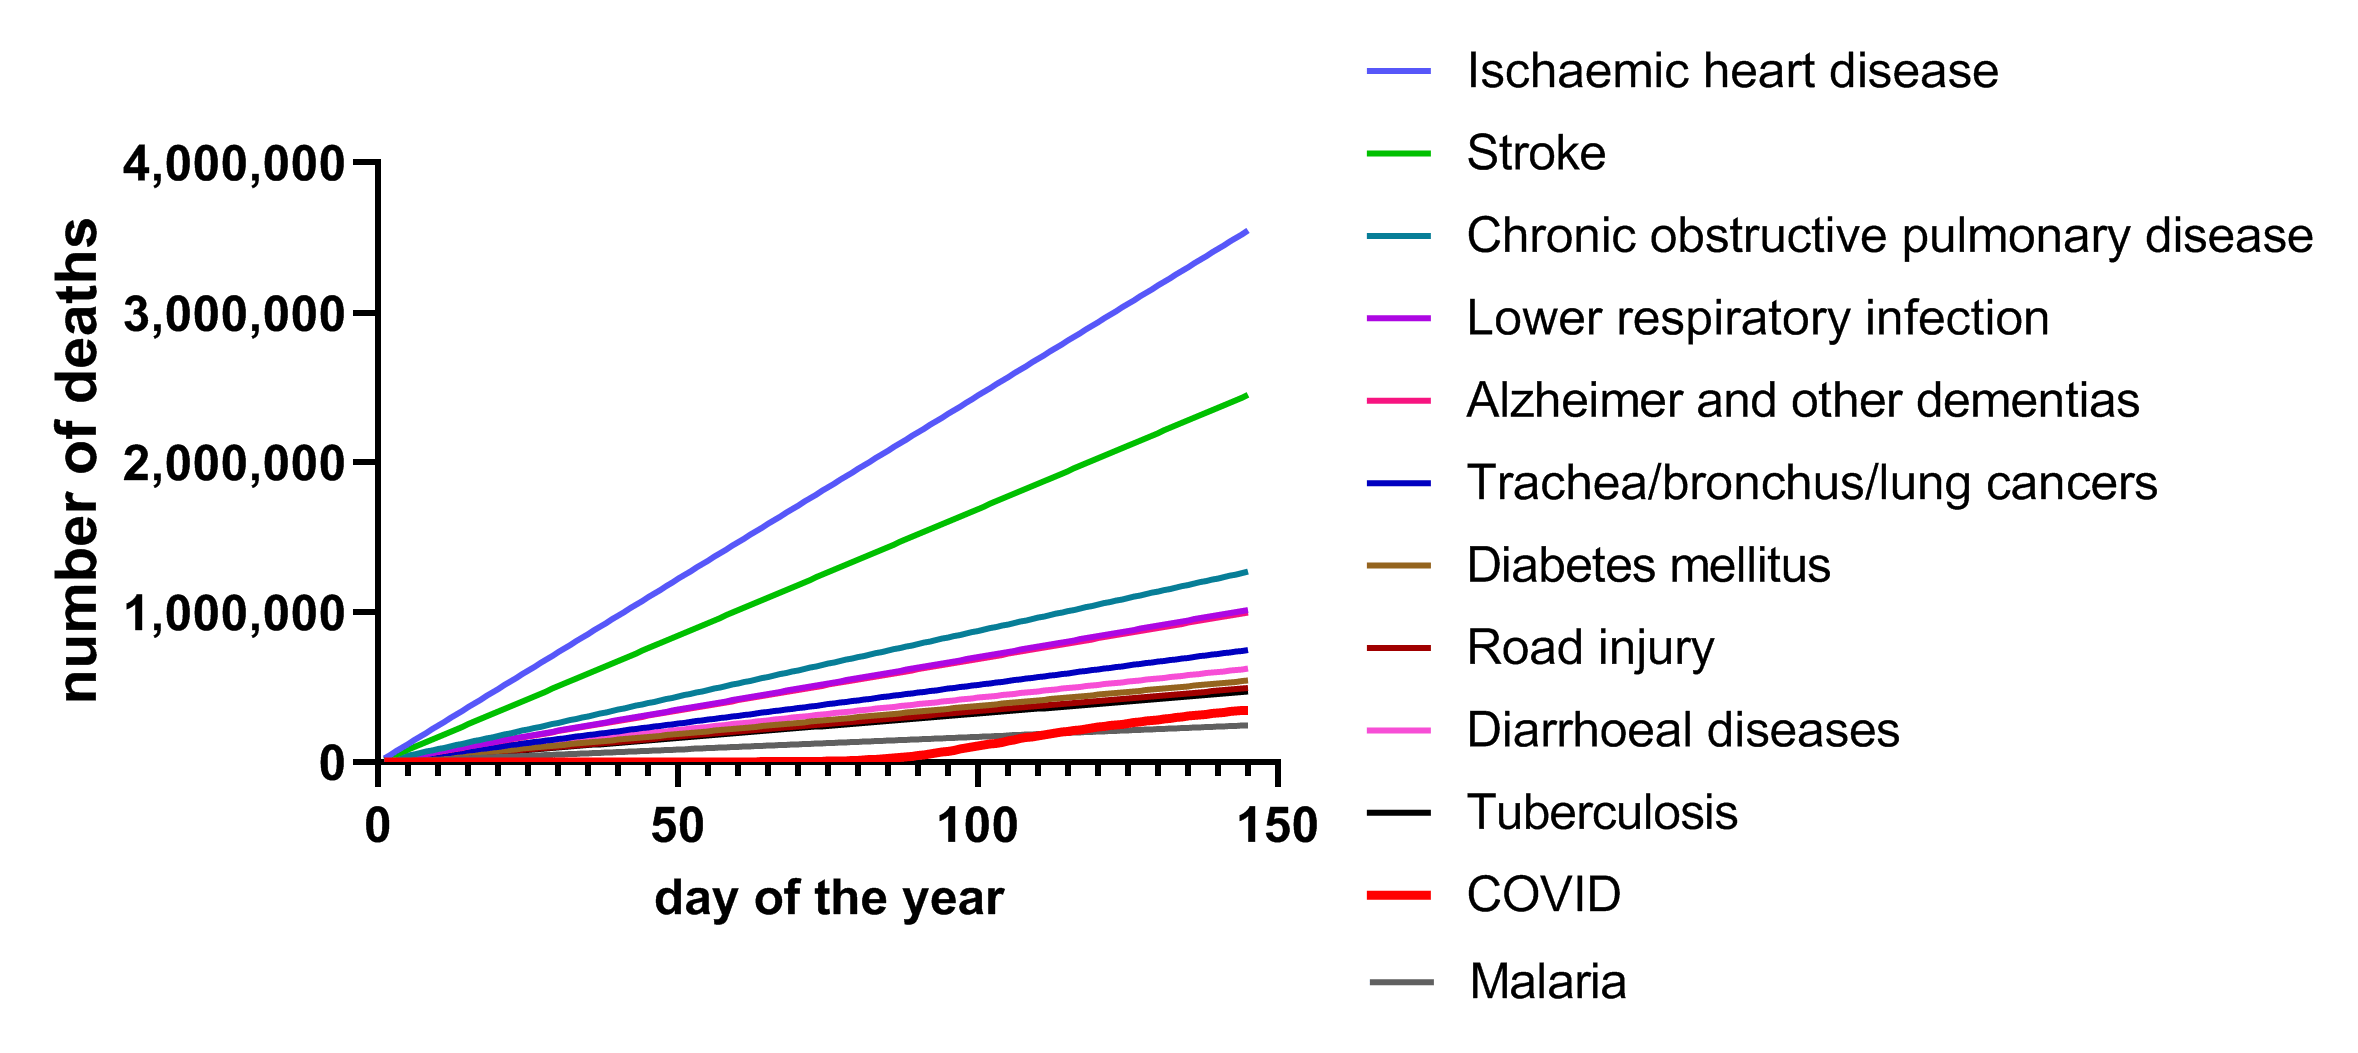 is among the leading causes of death worldwide so far in 2020, but beware of incomplete graphs - Health Feedback